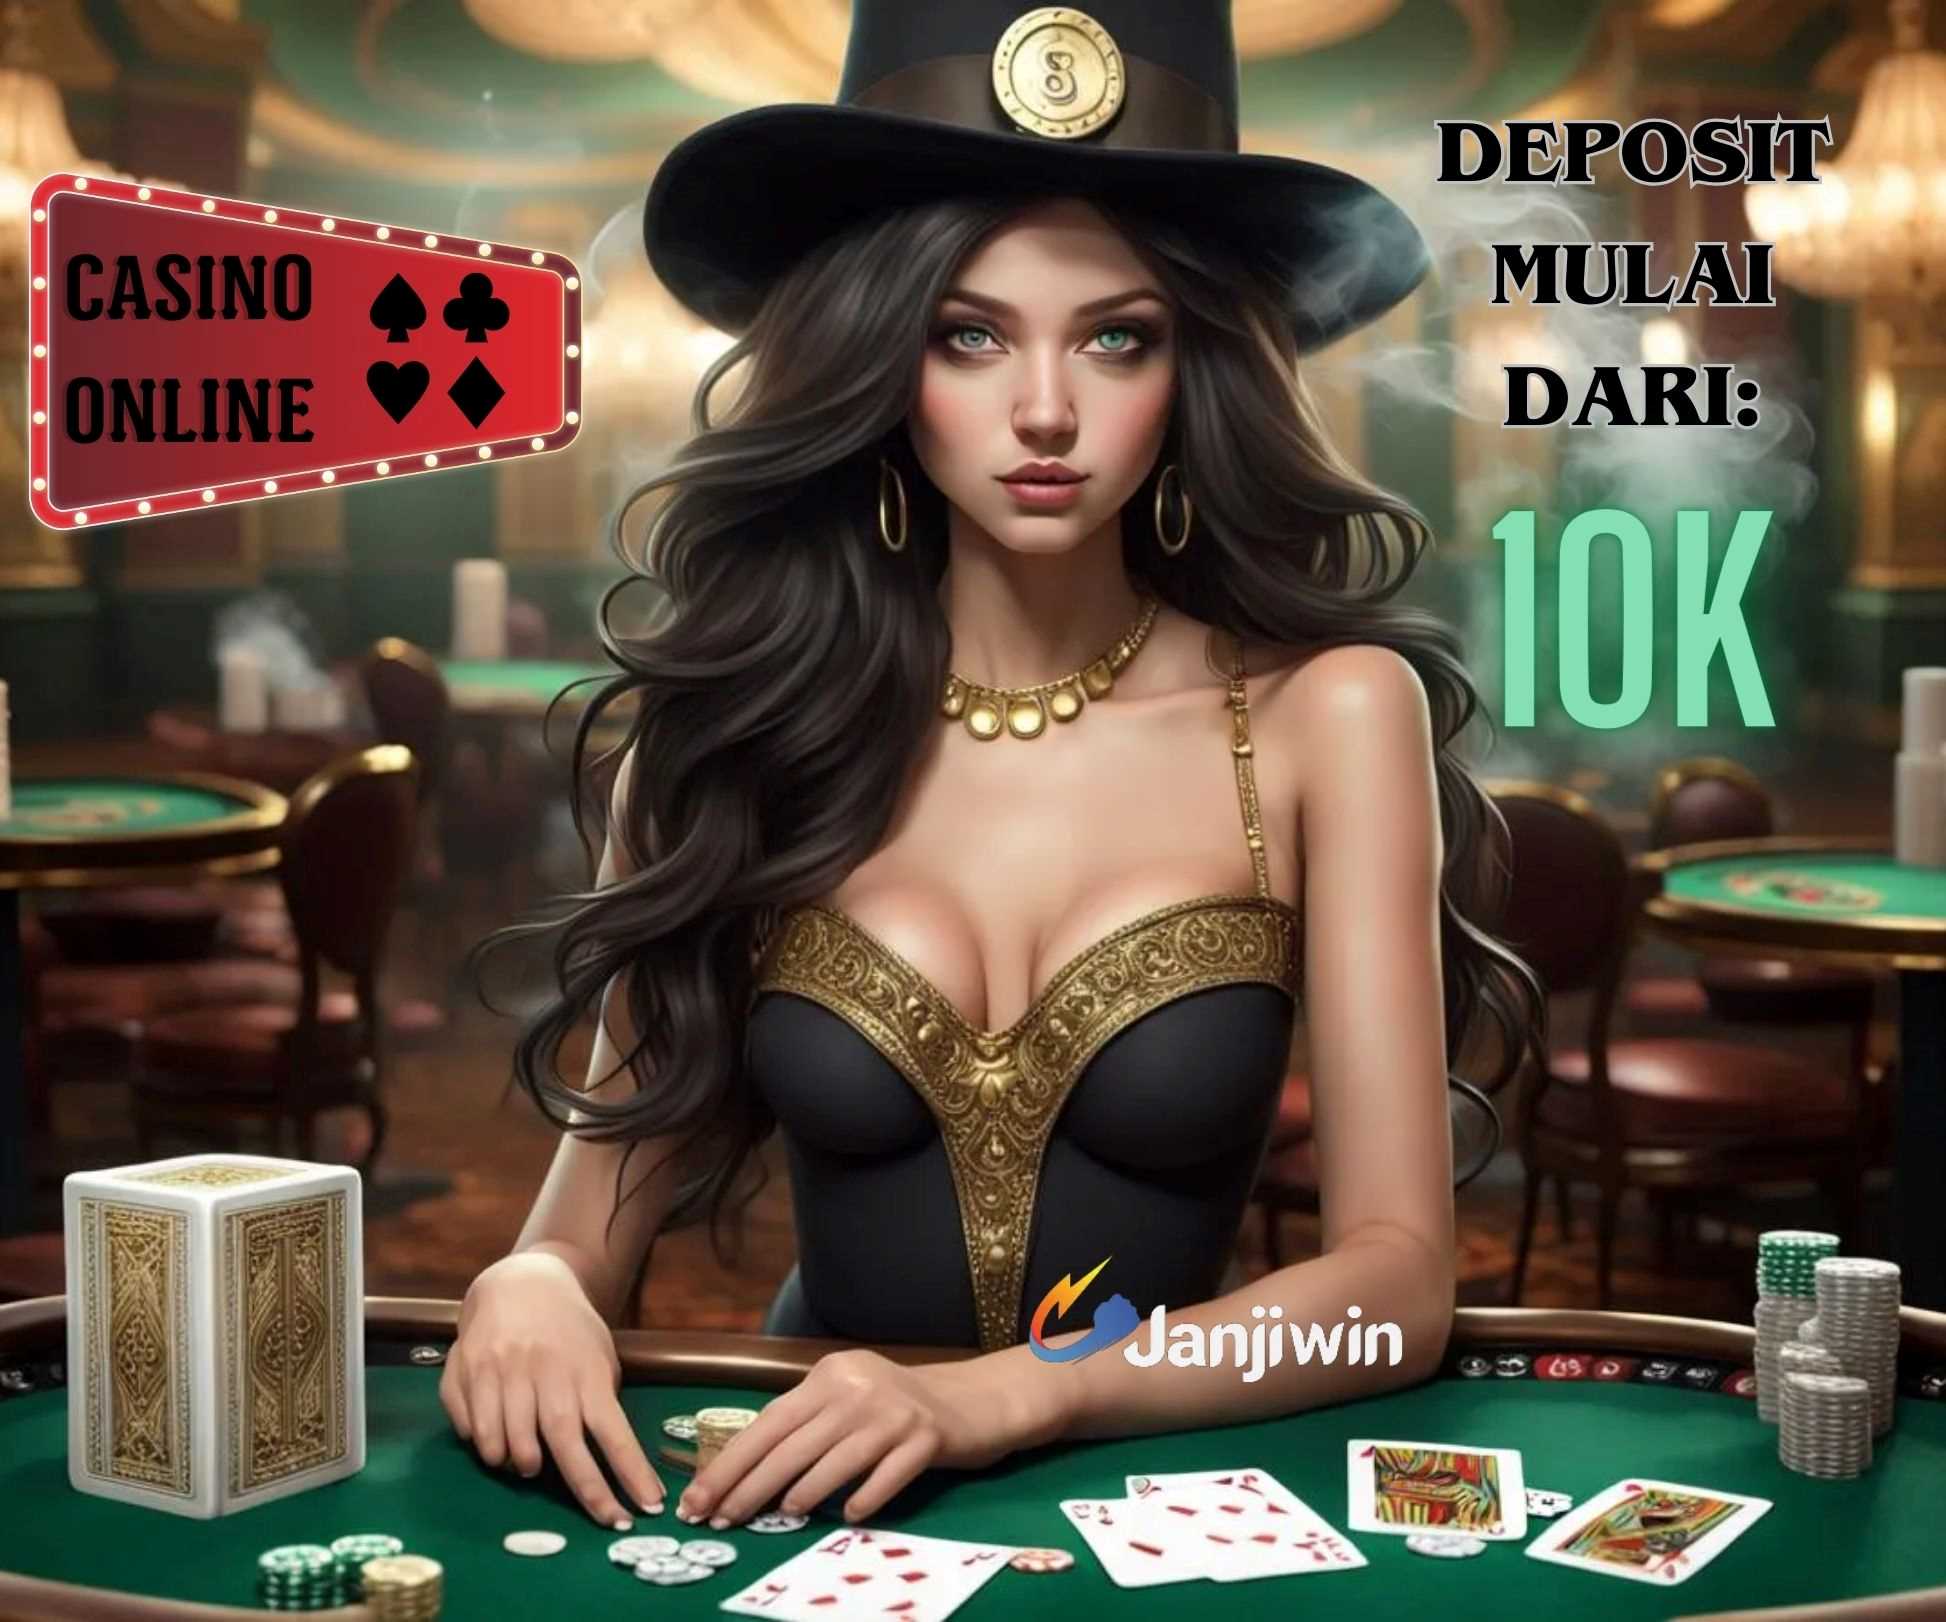 The most famous game in the world of casino online